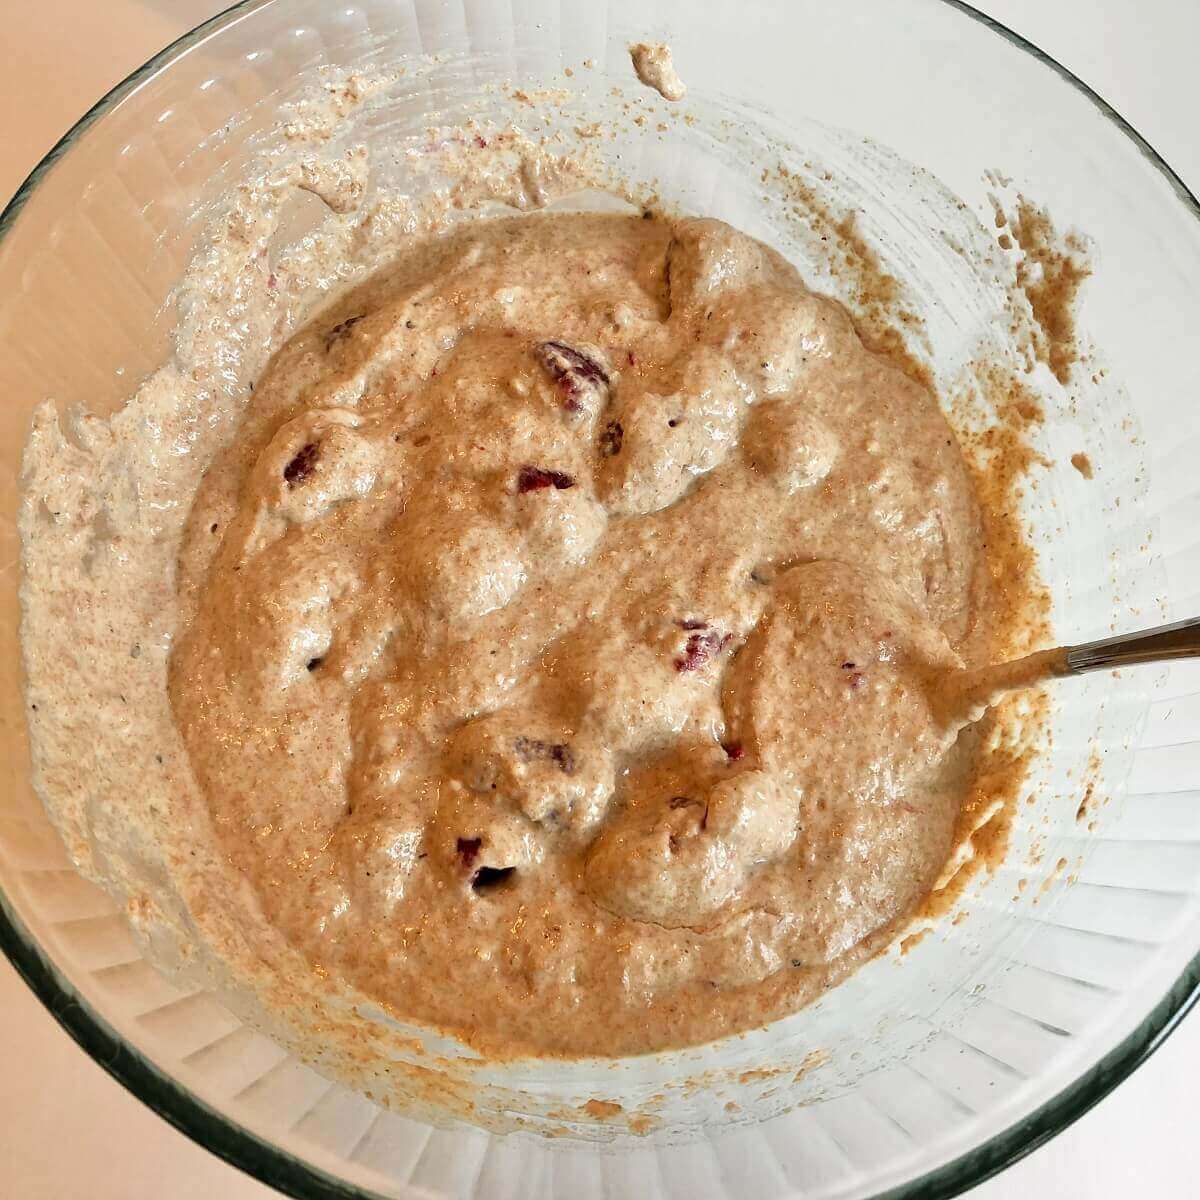 Raspberry muffin batter in a glass mixing bowl.